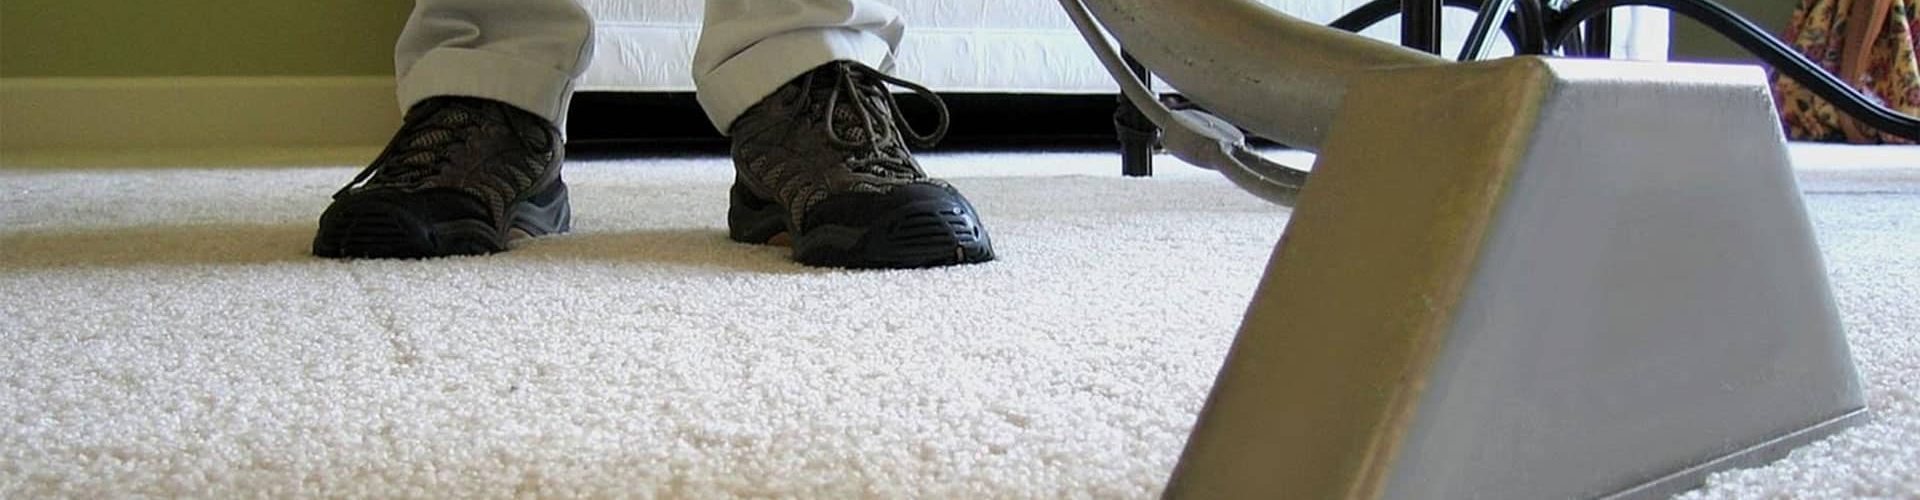 How often should carpet be professionally cleaned?